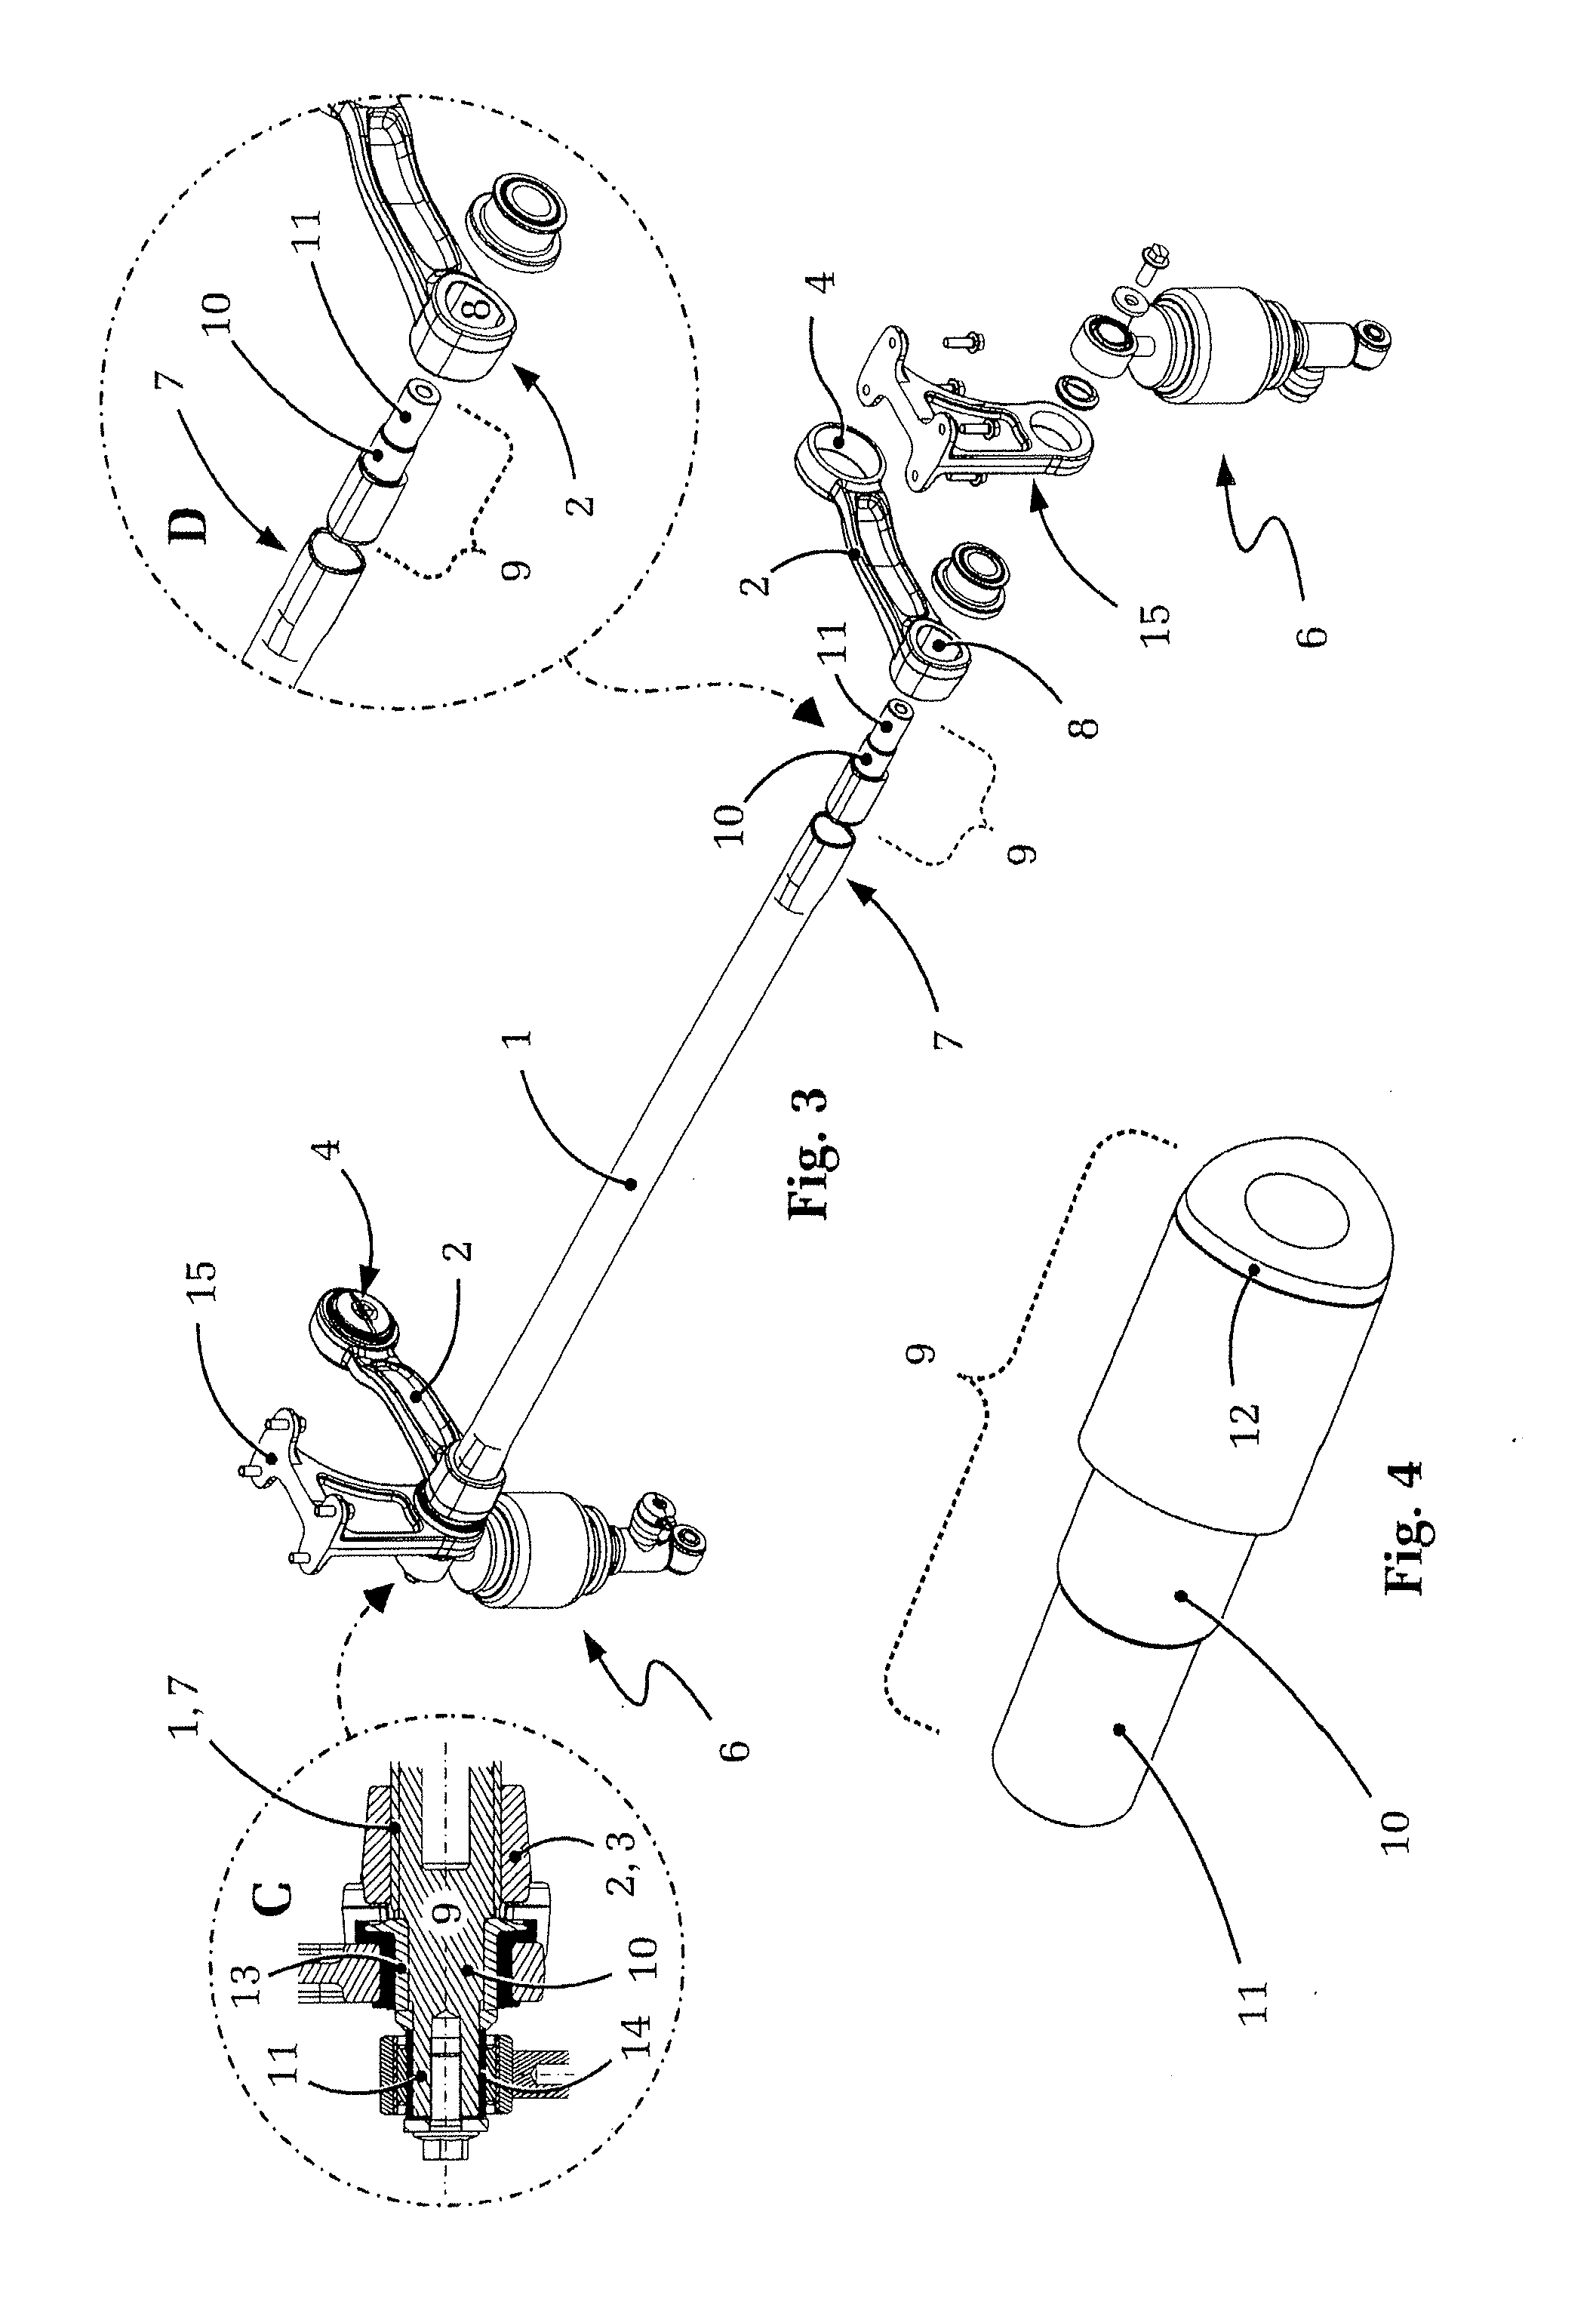 Hollow shaft connection device